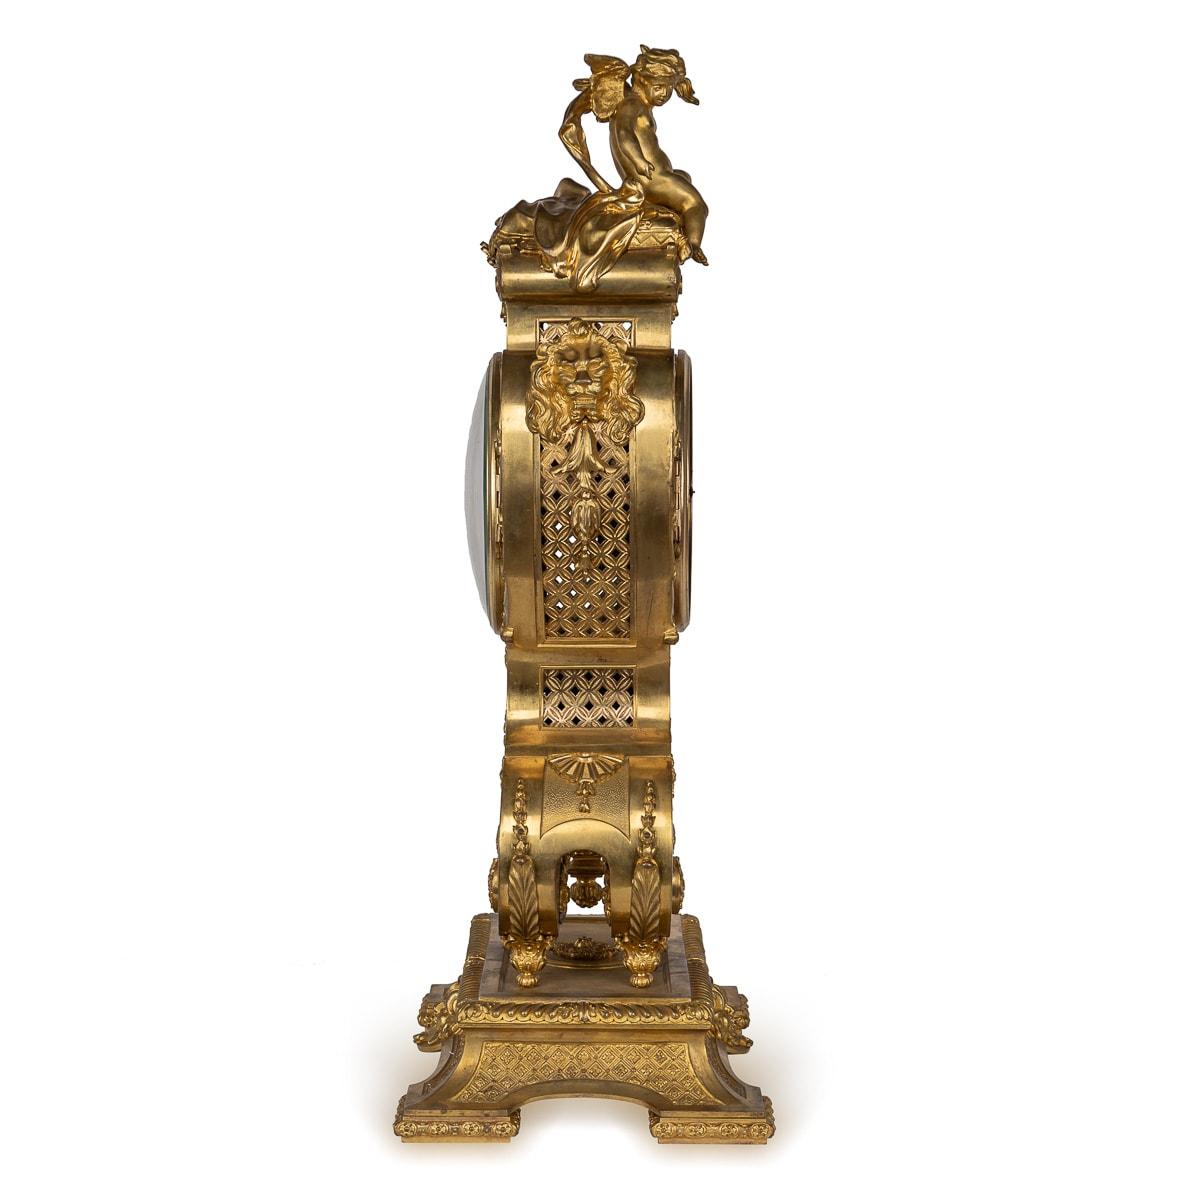 Antique 19th Century French Regency Style Gilt Bronze Clock, Thuret A Paris In Good Condition For Sale In Royal Tunbridge Wells, Kent